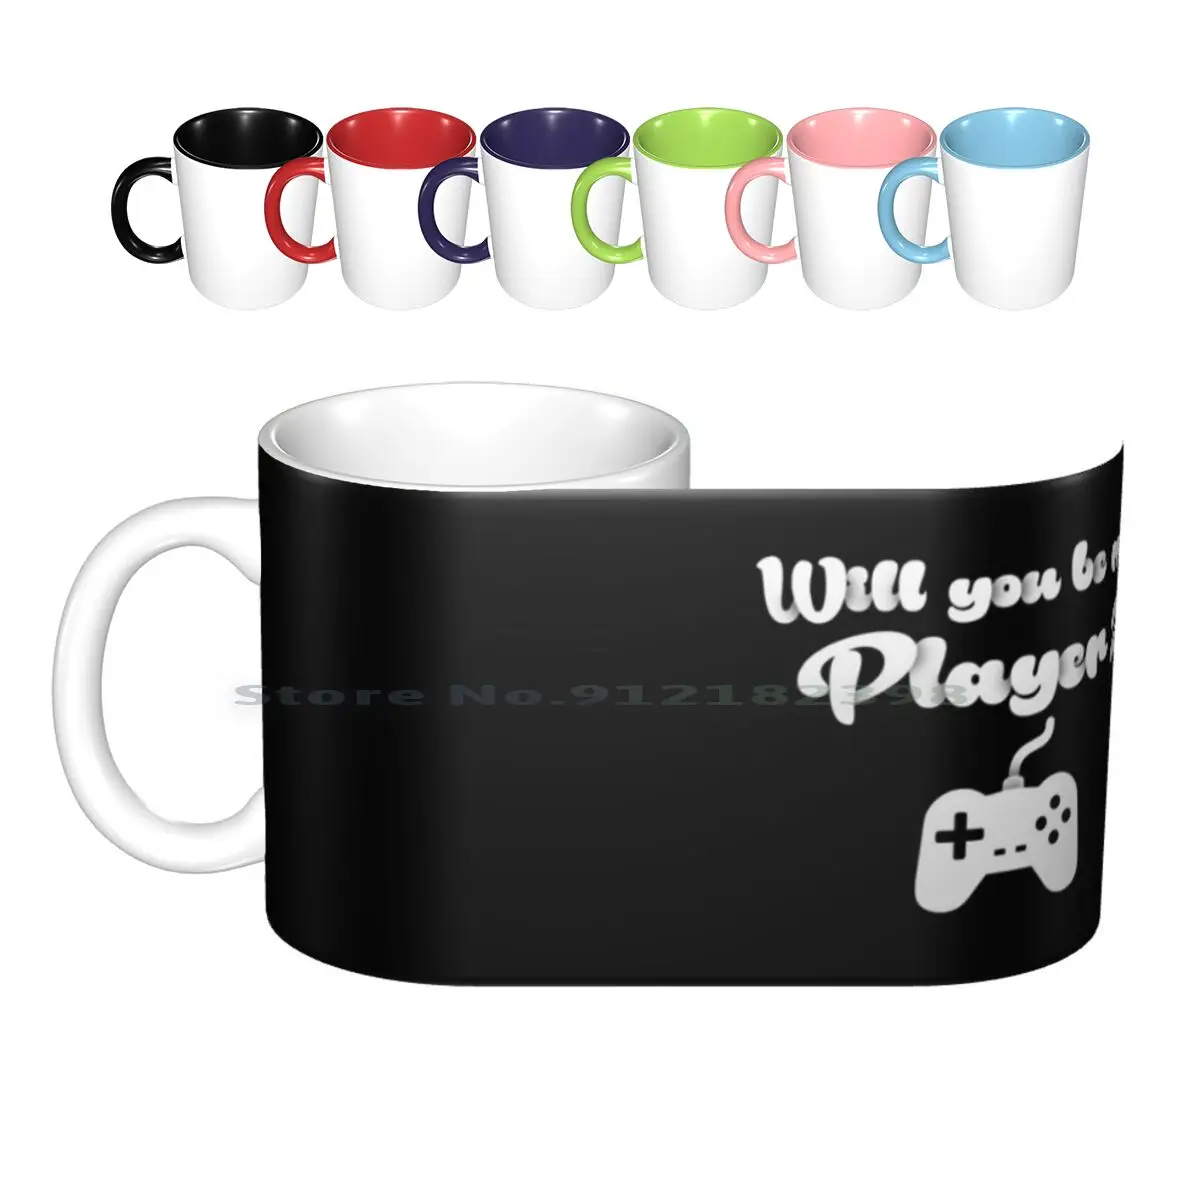 

Will You Be My Player 2-Version 1-White Ceramic Mugs Coffee Cups Milk Tea Mug You My Mine Play Player 2 Two Too Would Wish